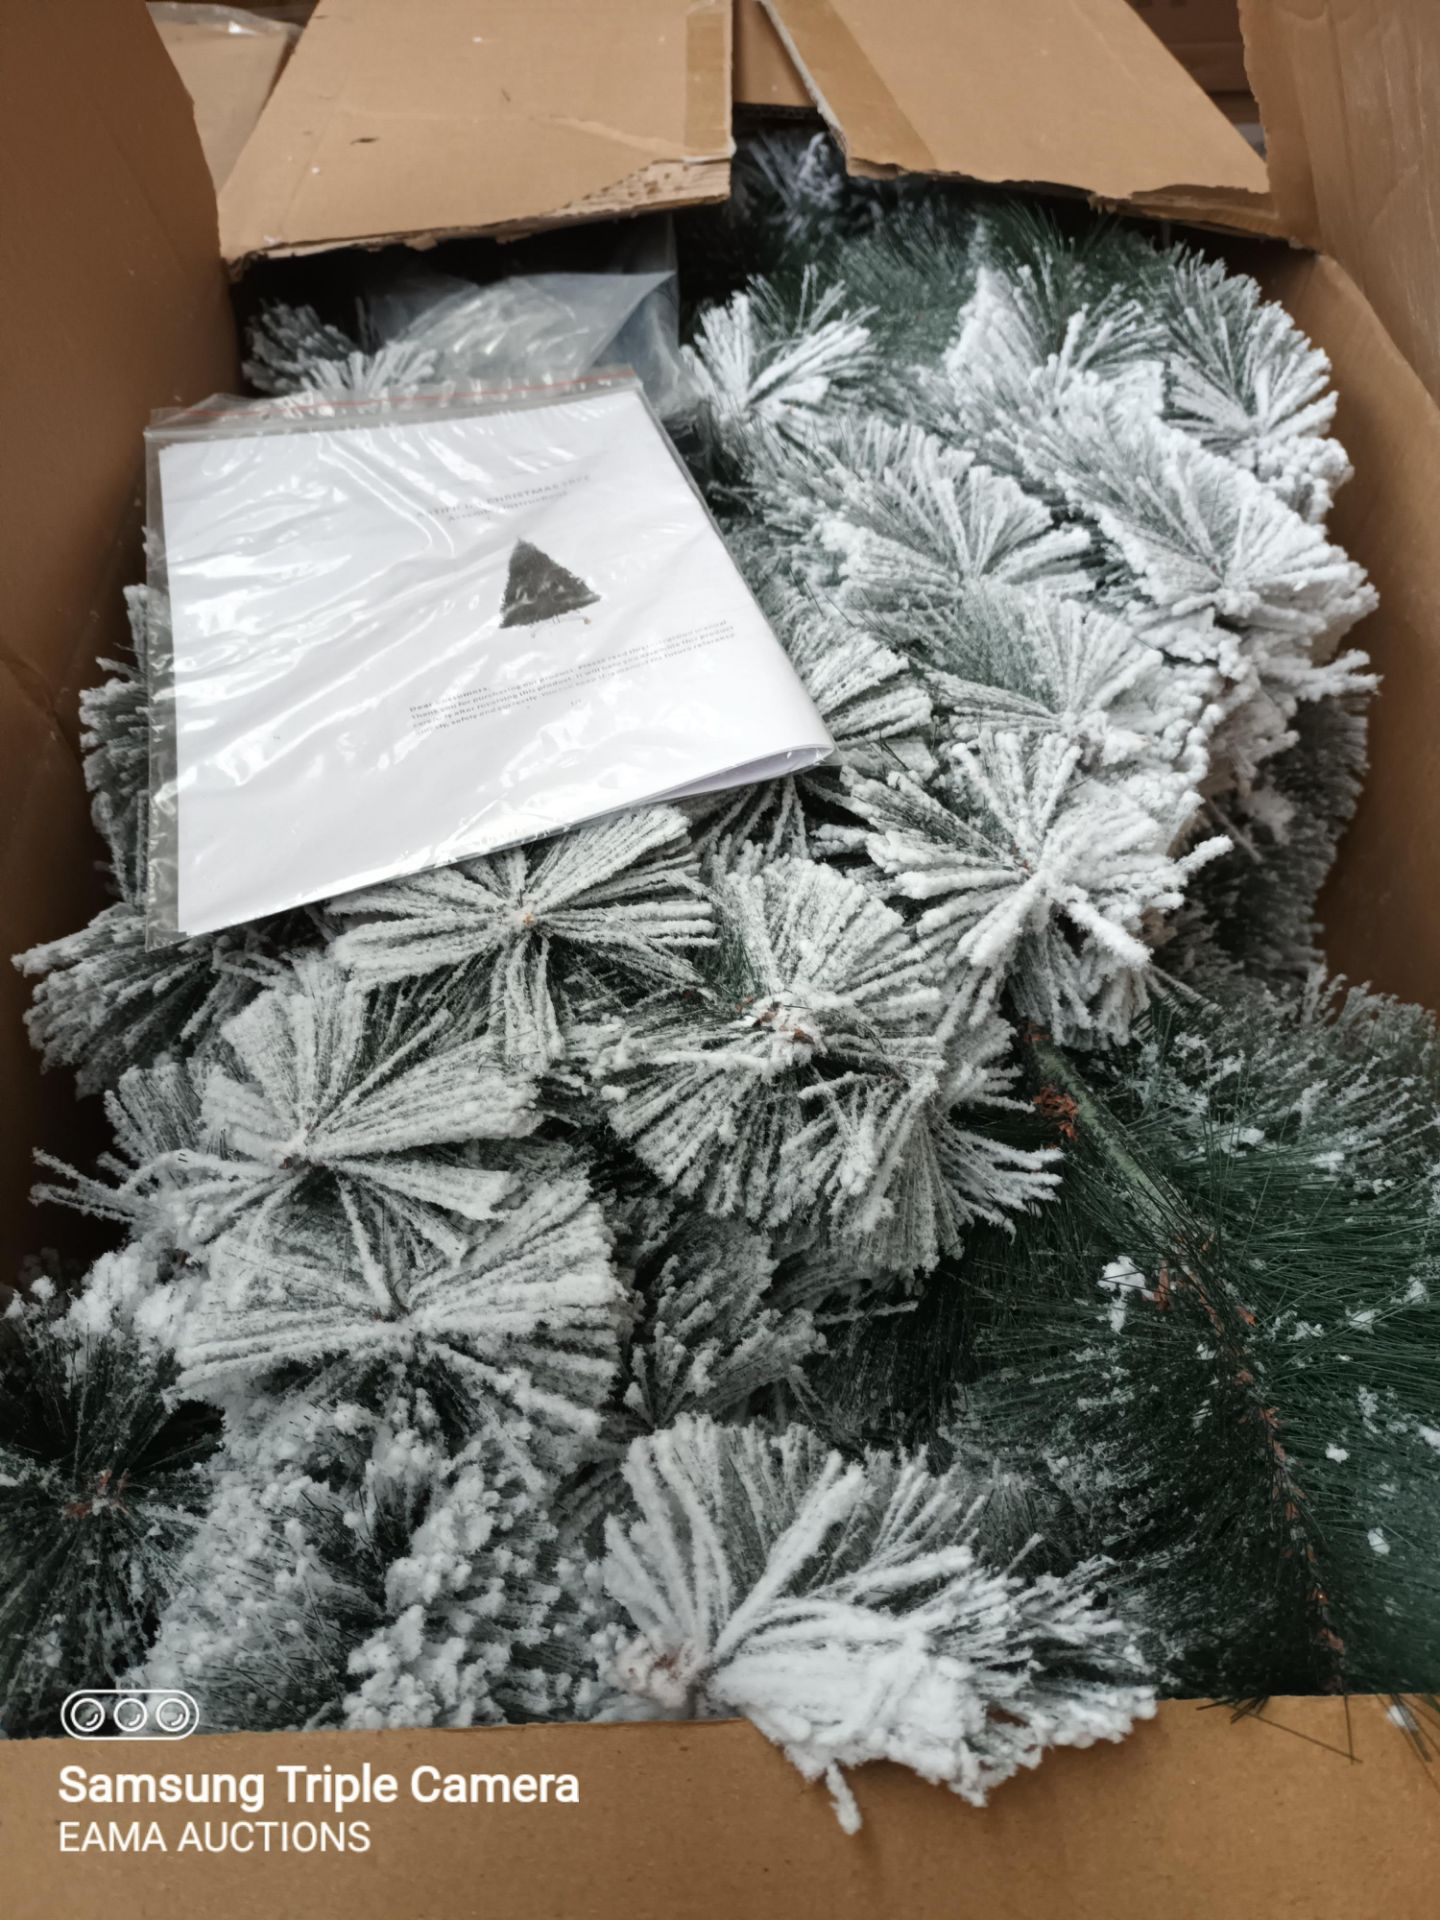 L209 - 1 PALLET CONTAINING APPROX 4 BRAND NEW ARTIFICIAL XMAS TREES SNOW EFFECT